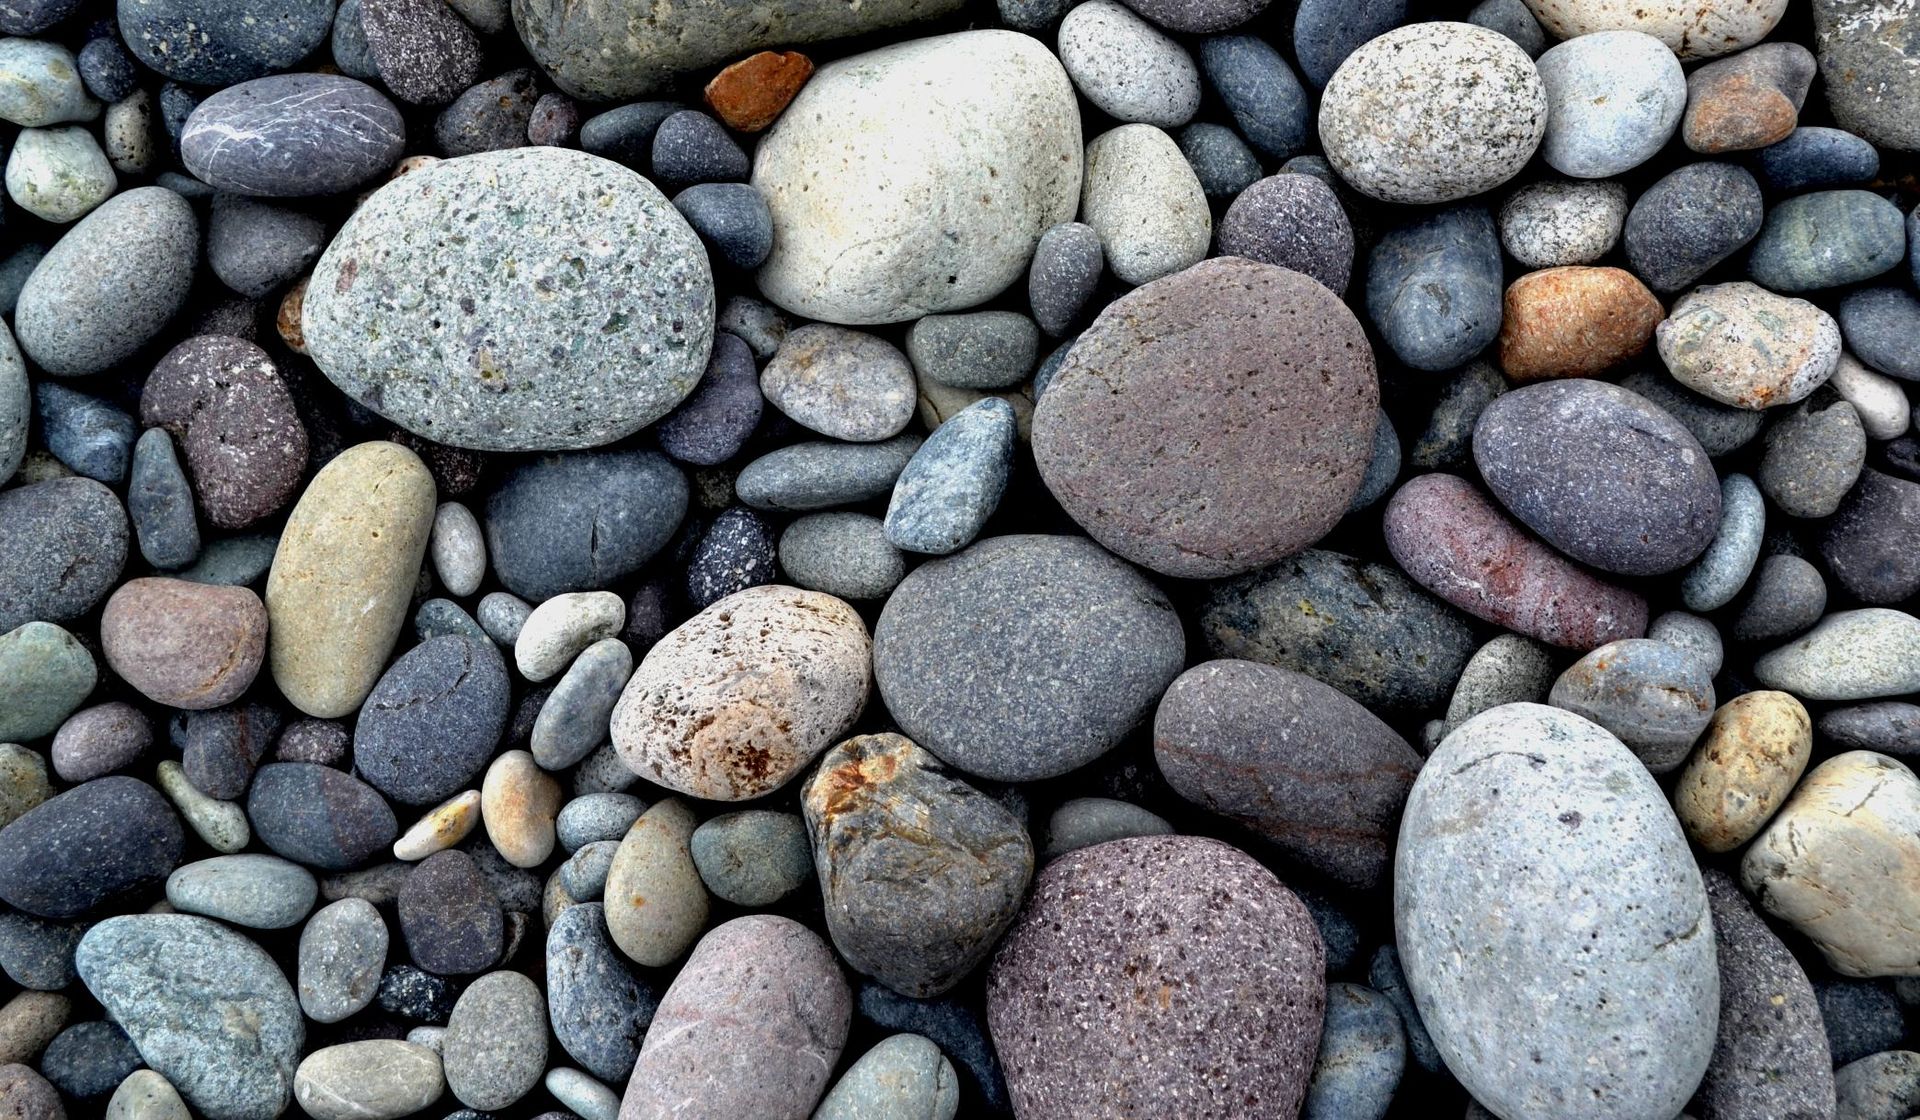 A pile of rocks of different sizes and colors on a beach.